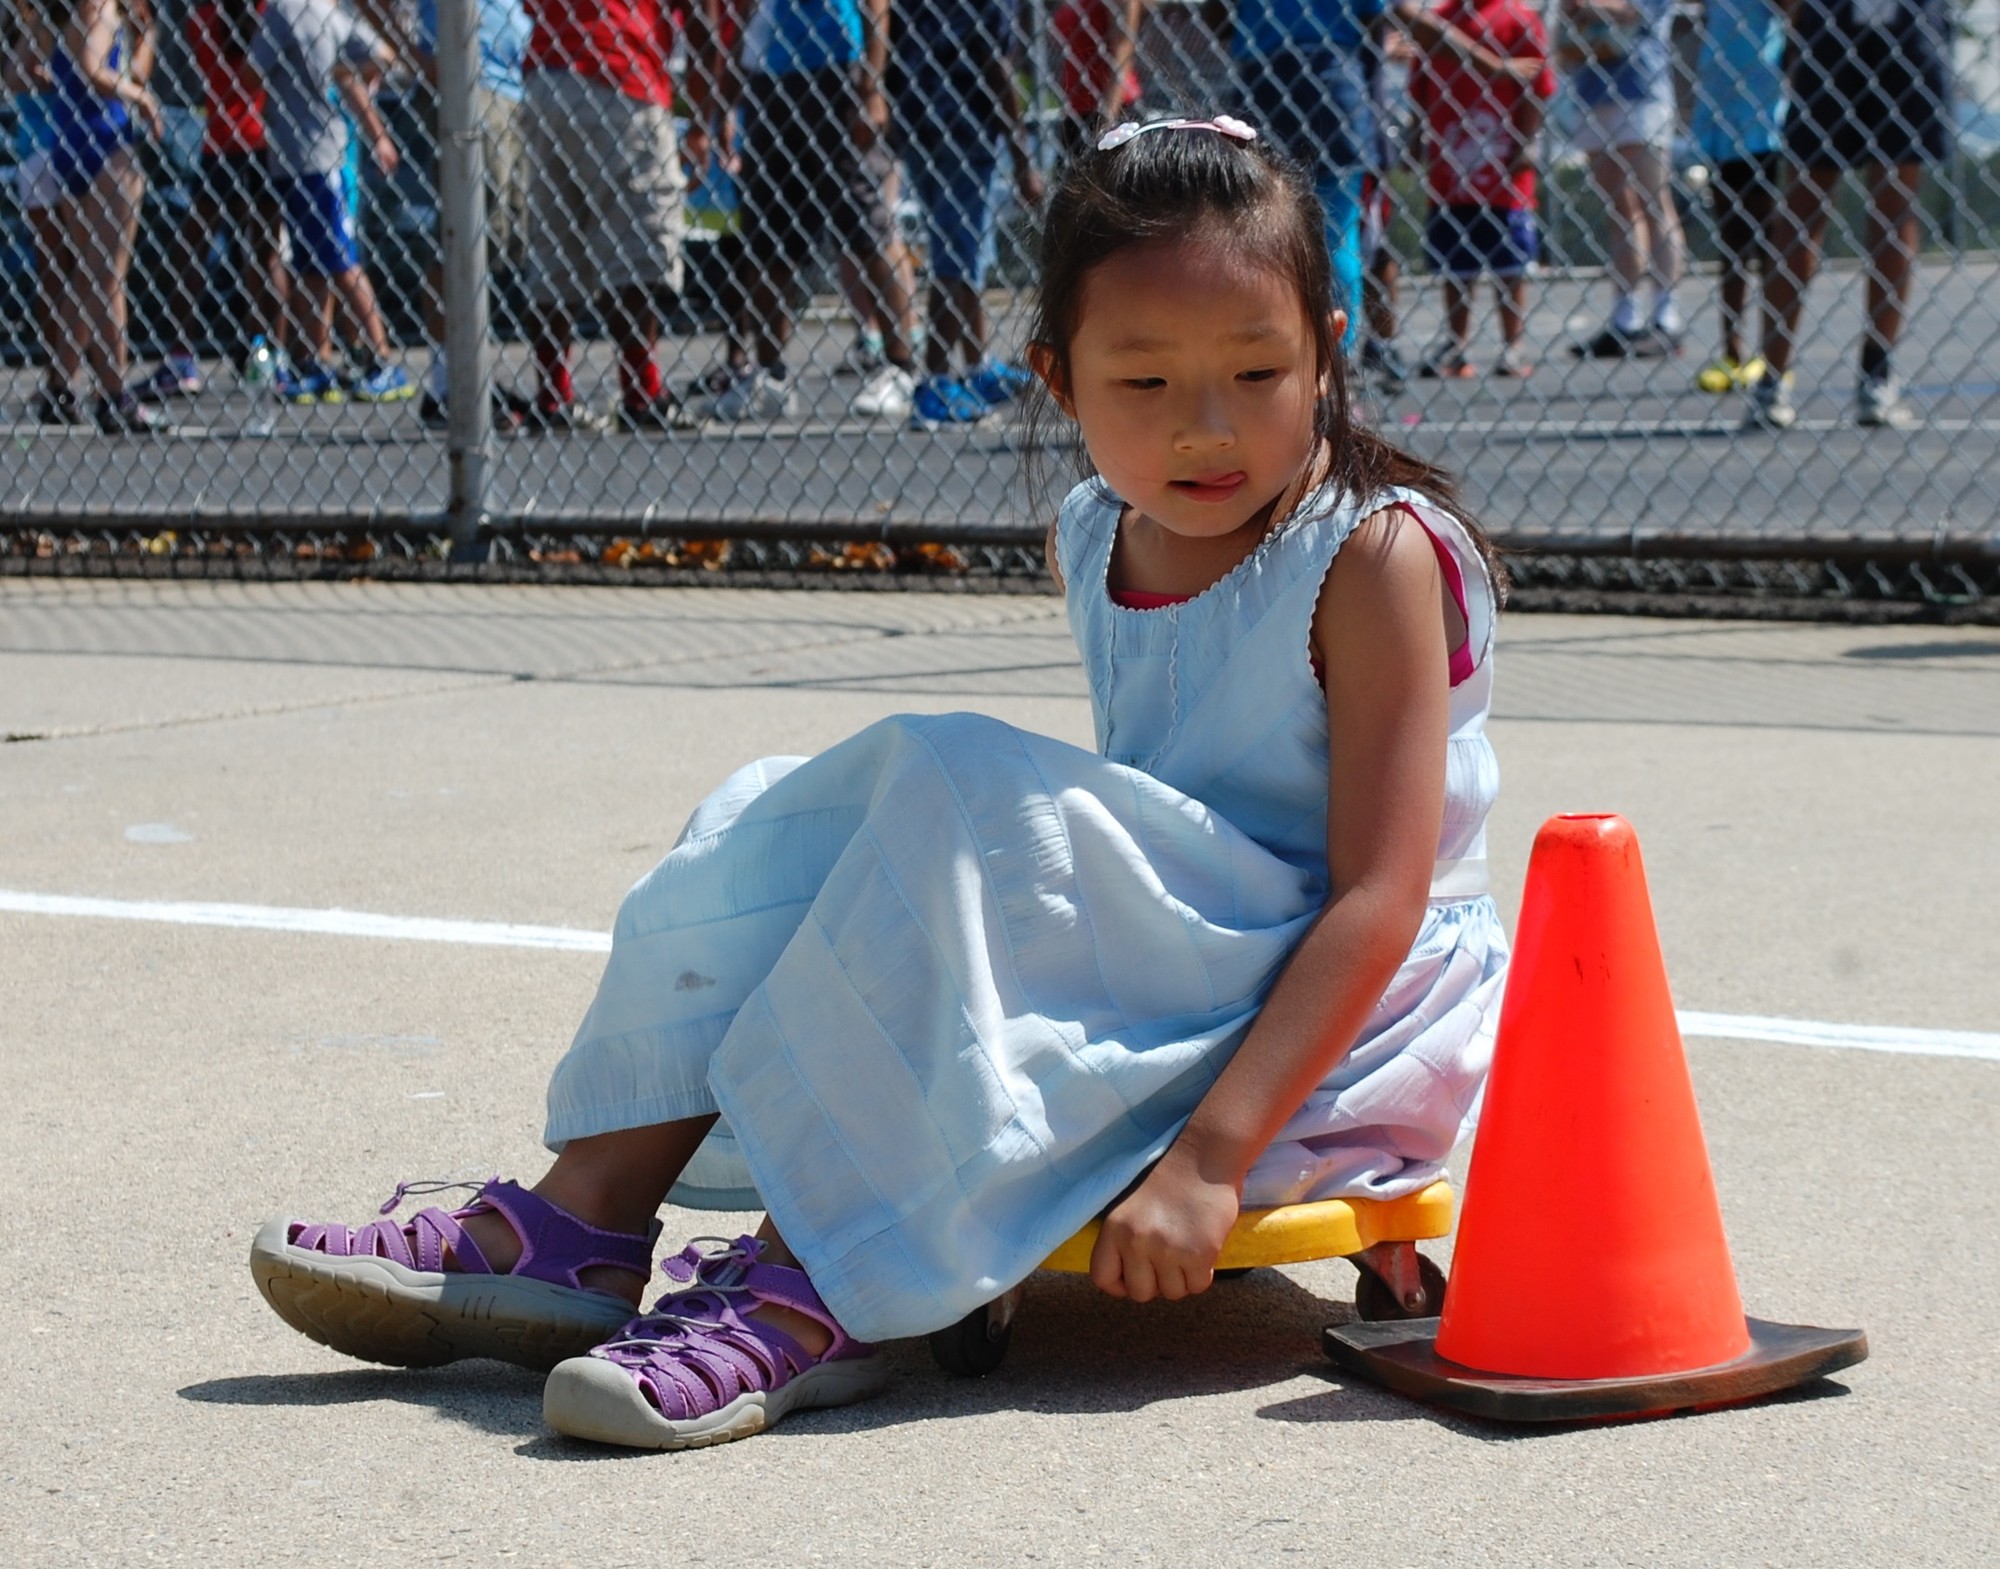 Emily Jia took part in the scooter races.